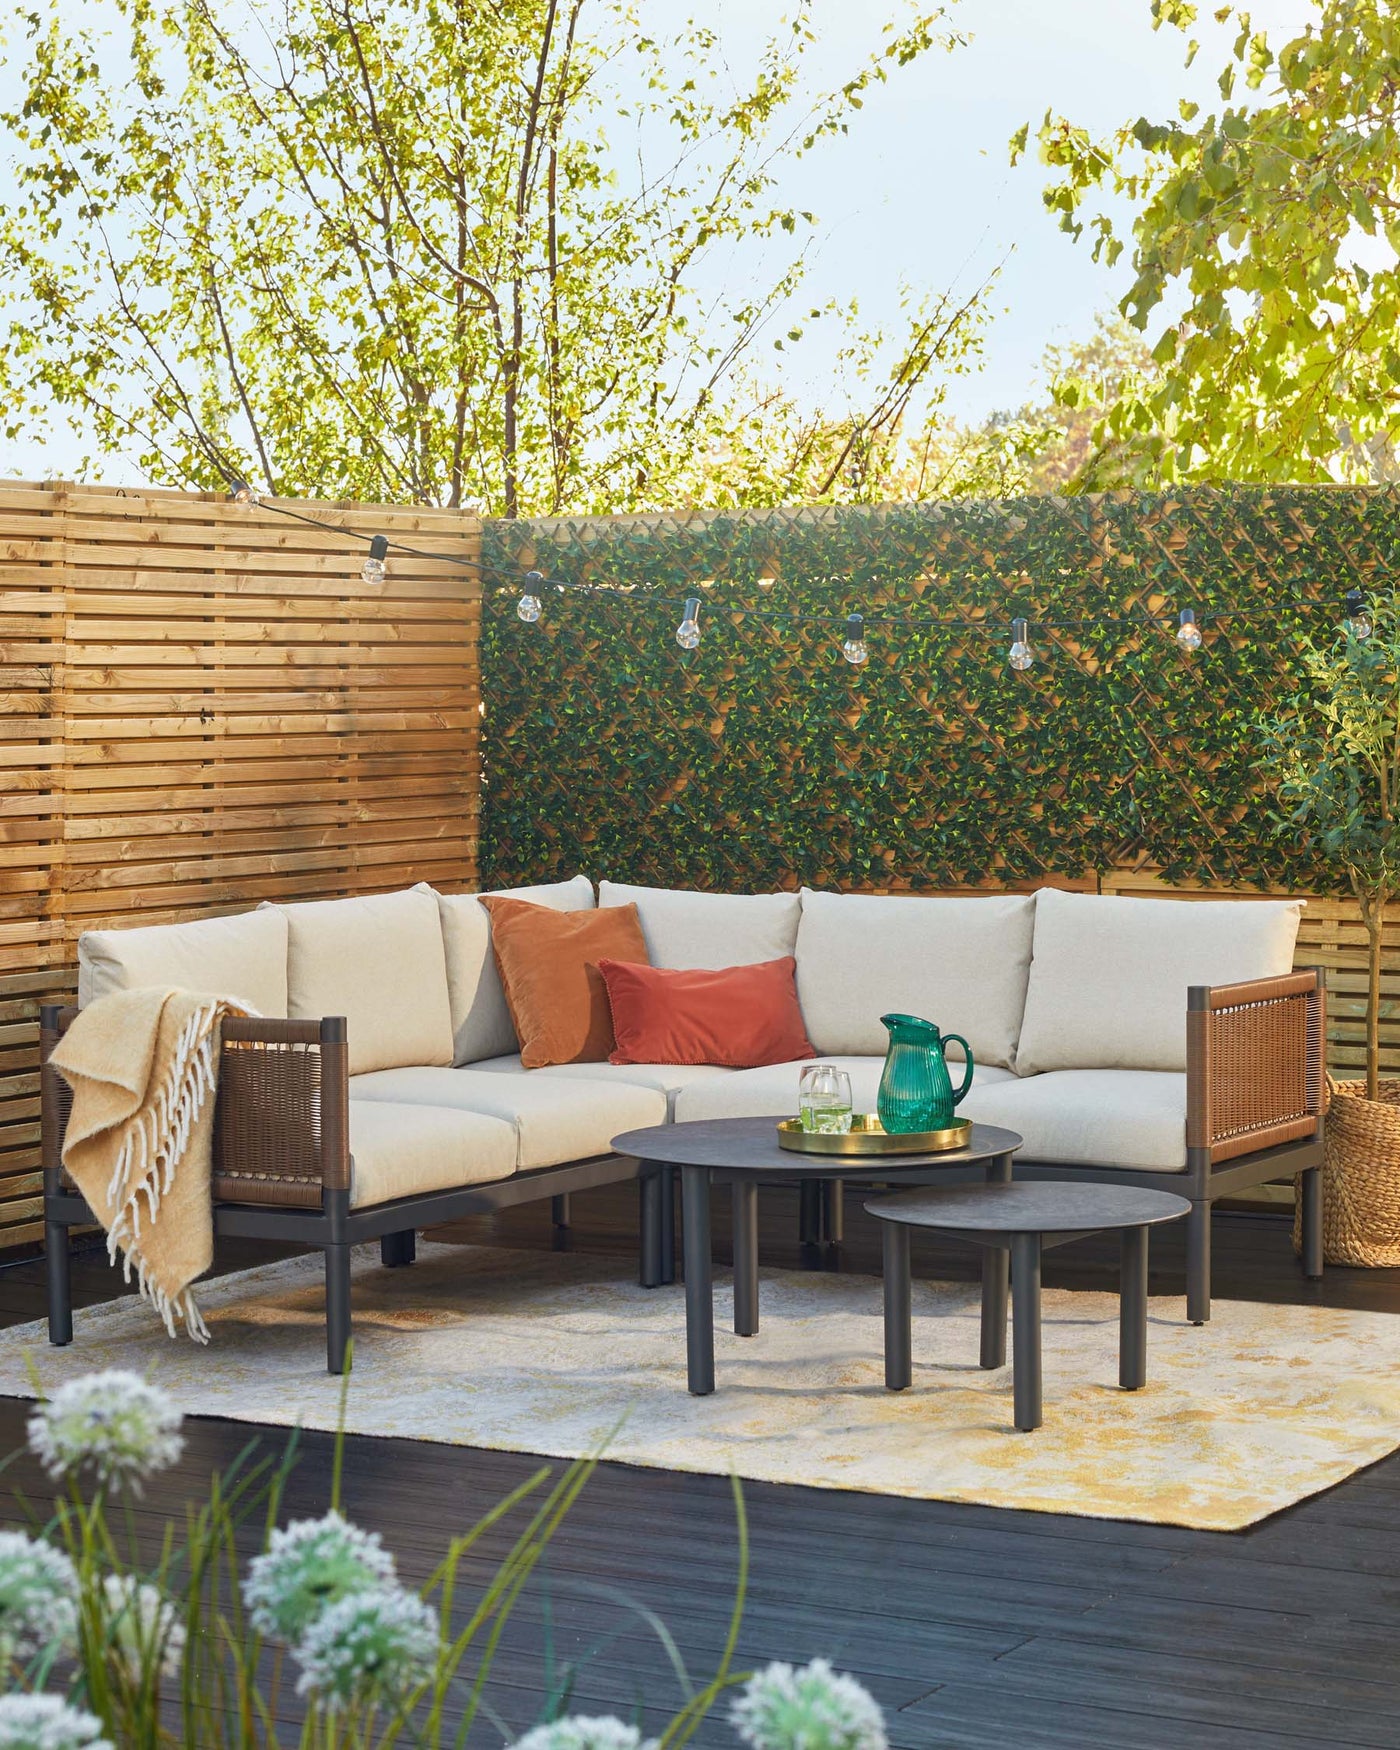 Outdoor patio furniture set featuring a sectional corner sofa with beige cushions and accompanied by a single matching armchair. A central coffee table accompanied by two smaller nesting tables, all in a matching dark finish, sits atop a light, patterned area rug. The set is adorned with throw pillows in neutral and reddish tones, and a cosy blanket is draped over the armchair.